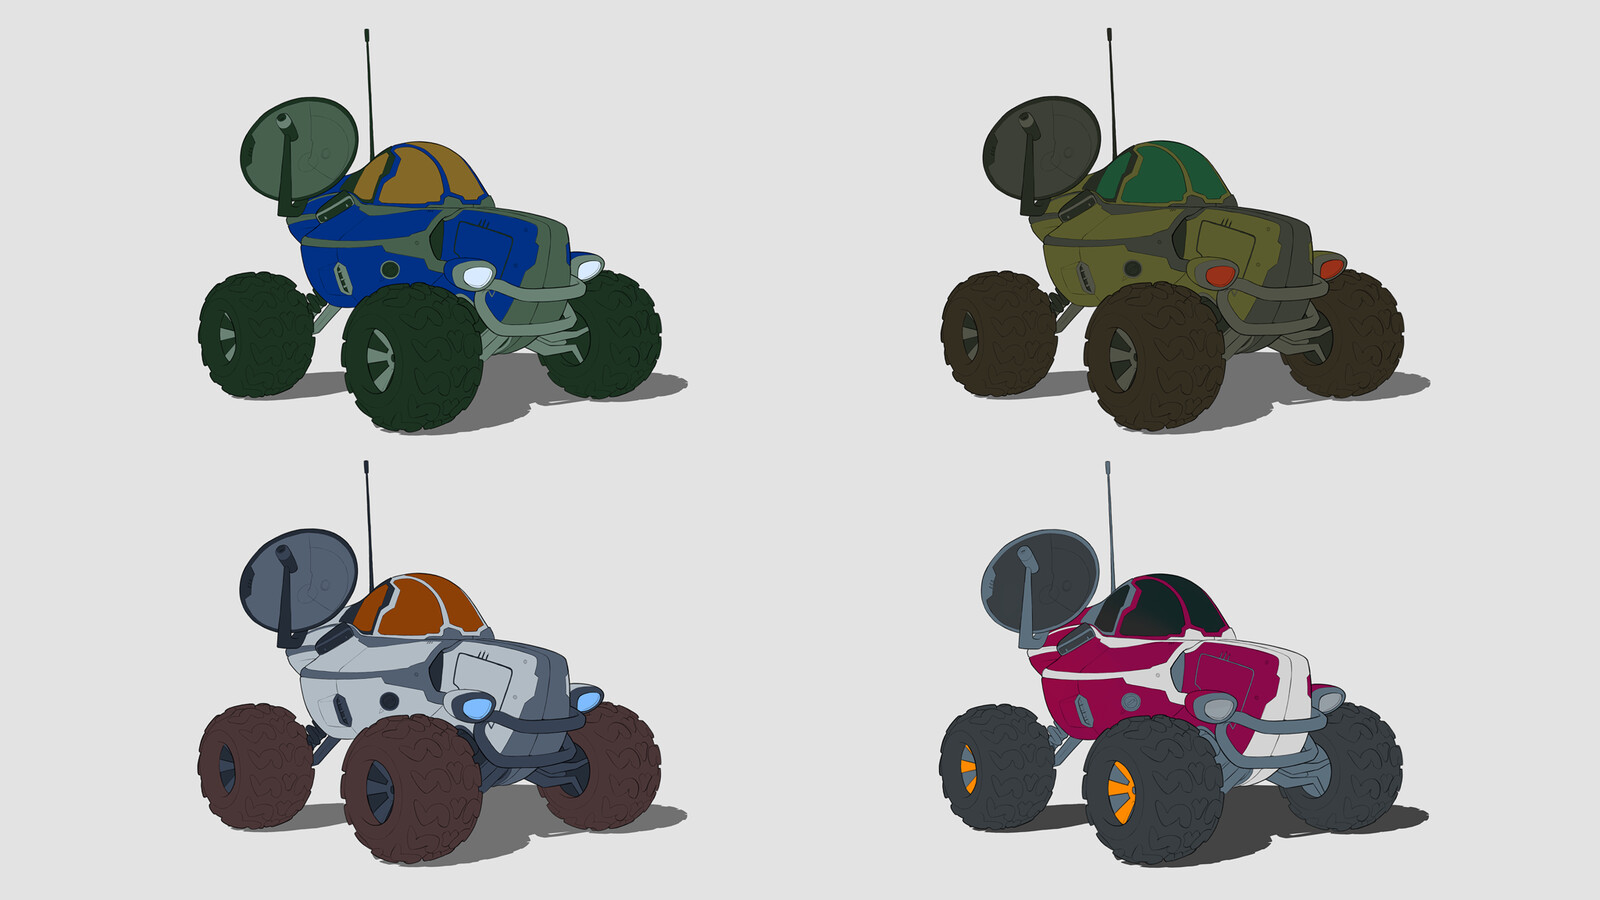 Color tests. Who can spot which franchises they are inspired from?